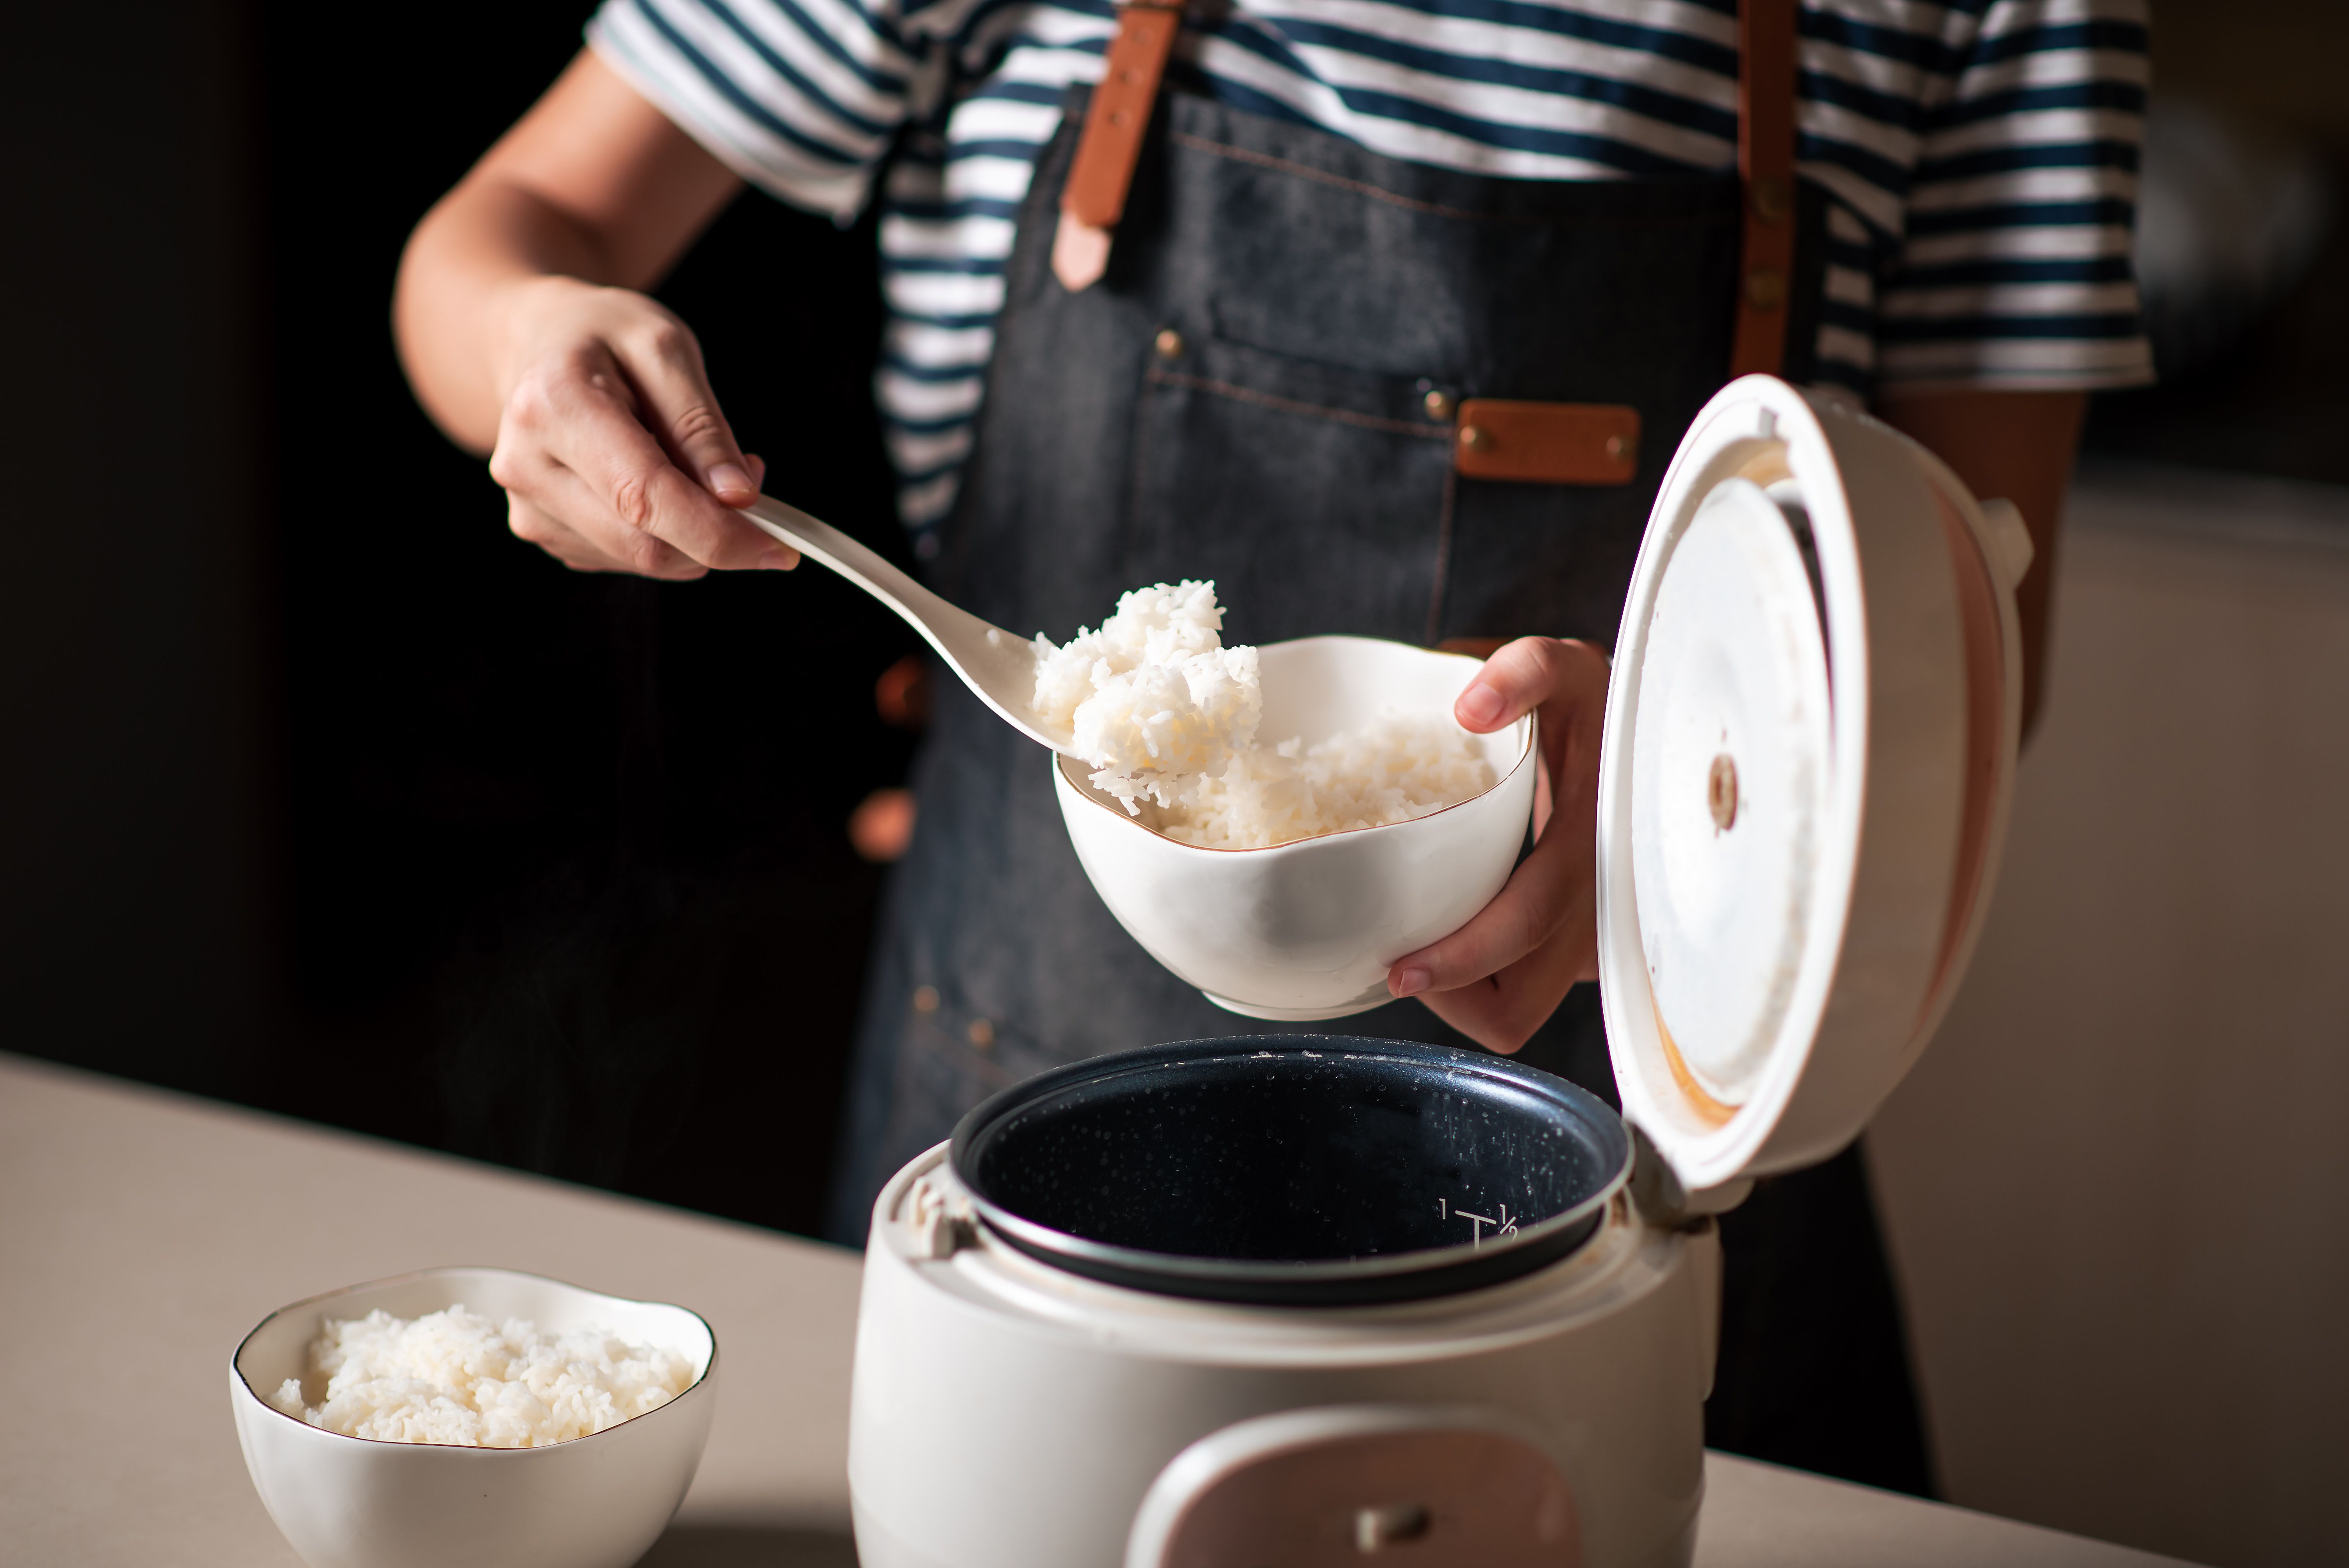 https://hips.hearstapps.com/hmg-prod/images/woman-taking-out-and-serving-fresh-boiled-rice-from-royalty-free-image-1651258733.jpg